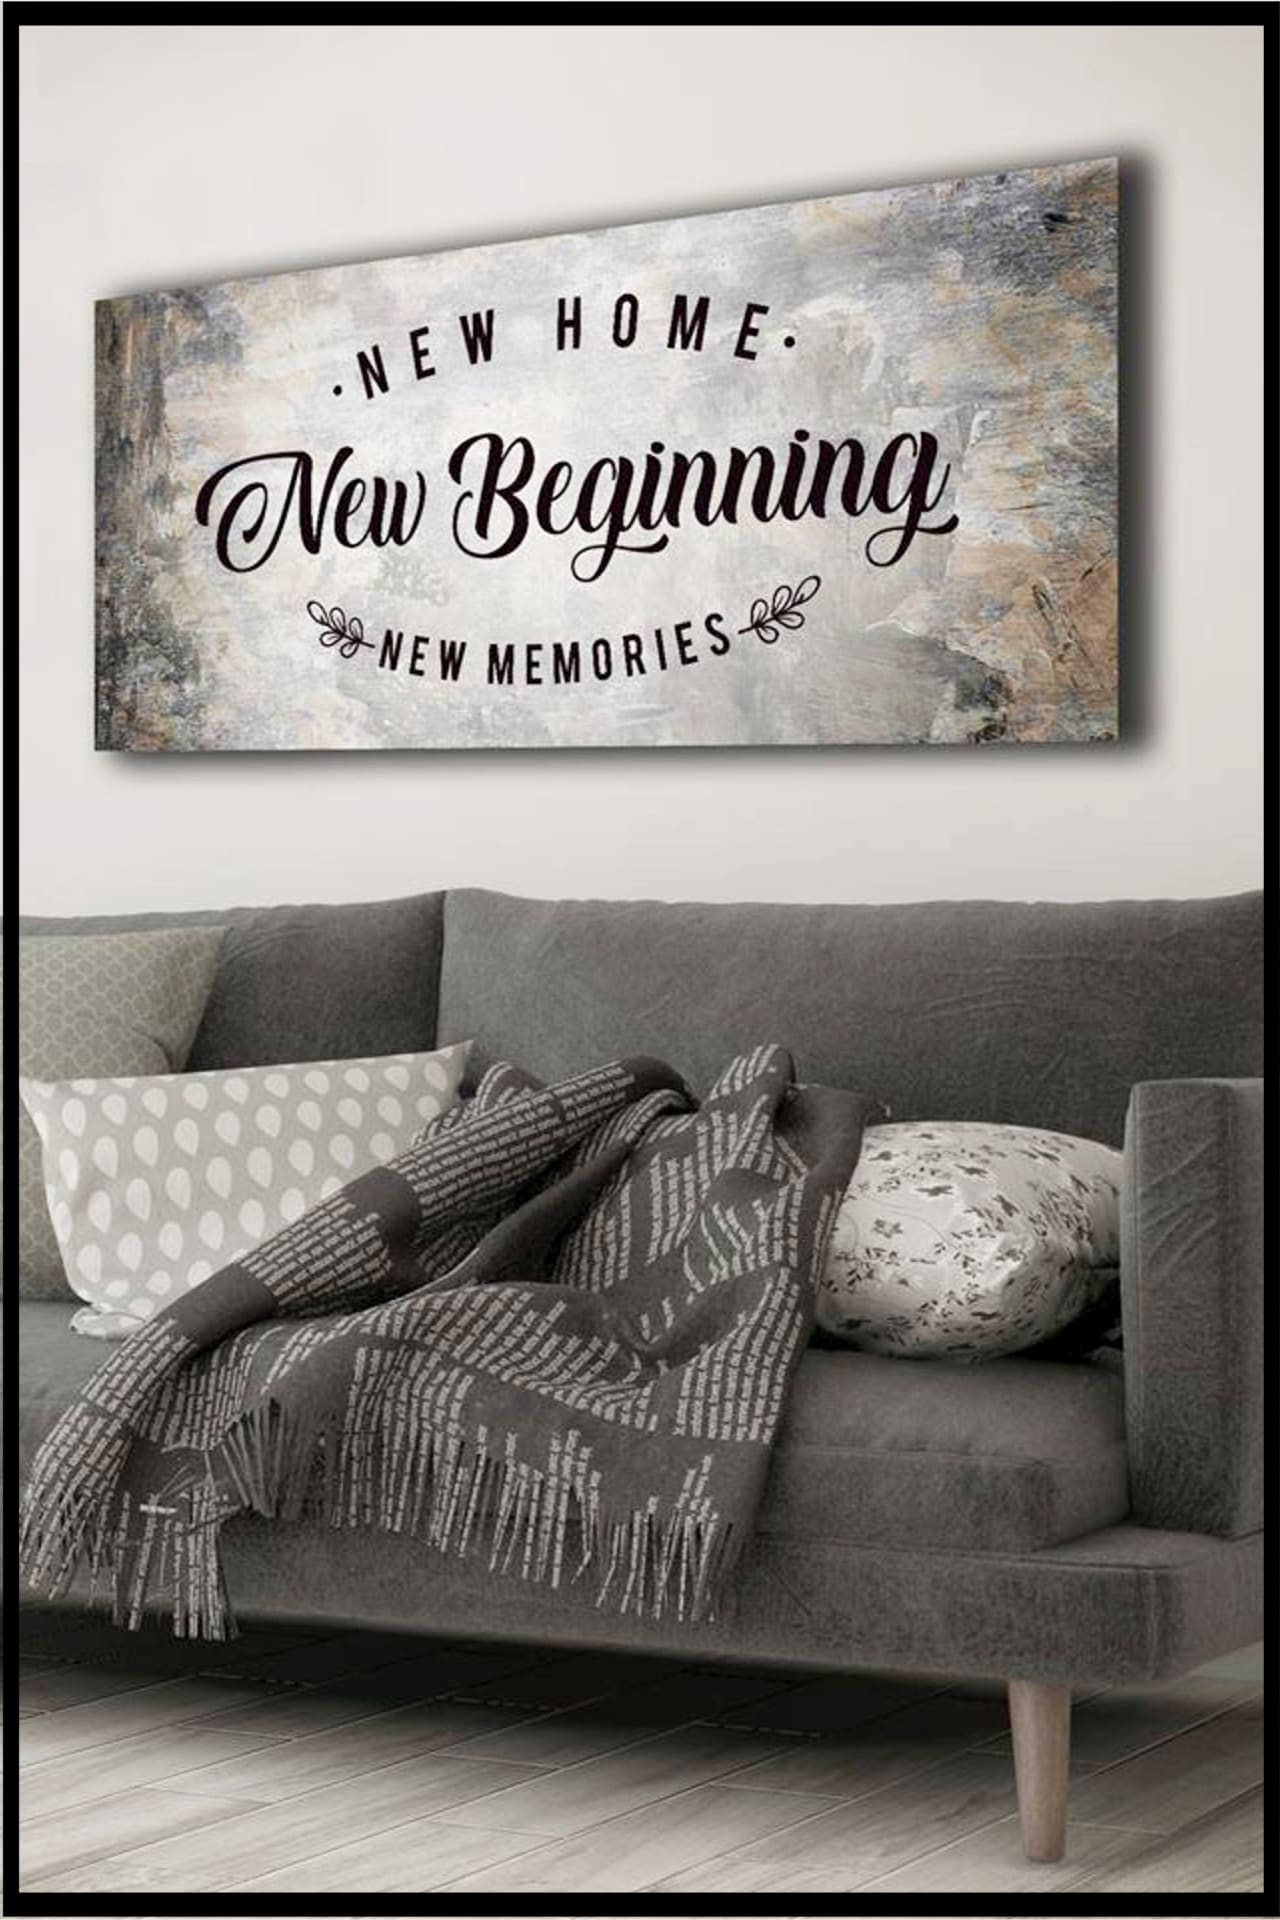 New Home Gift Ideas - Love this rustic pallet wall sign - perfect for a neutral living room!  Lots more Housewarming Gifts For First Time Homeowners in Their First Home - Unique Housewarming Gift Ideas and DIY Housewarming Gifts They'll Love - First Time Home Buyer Gift Basket Ideas on this page!